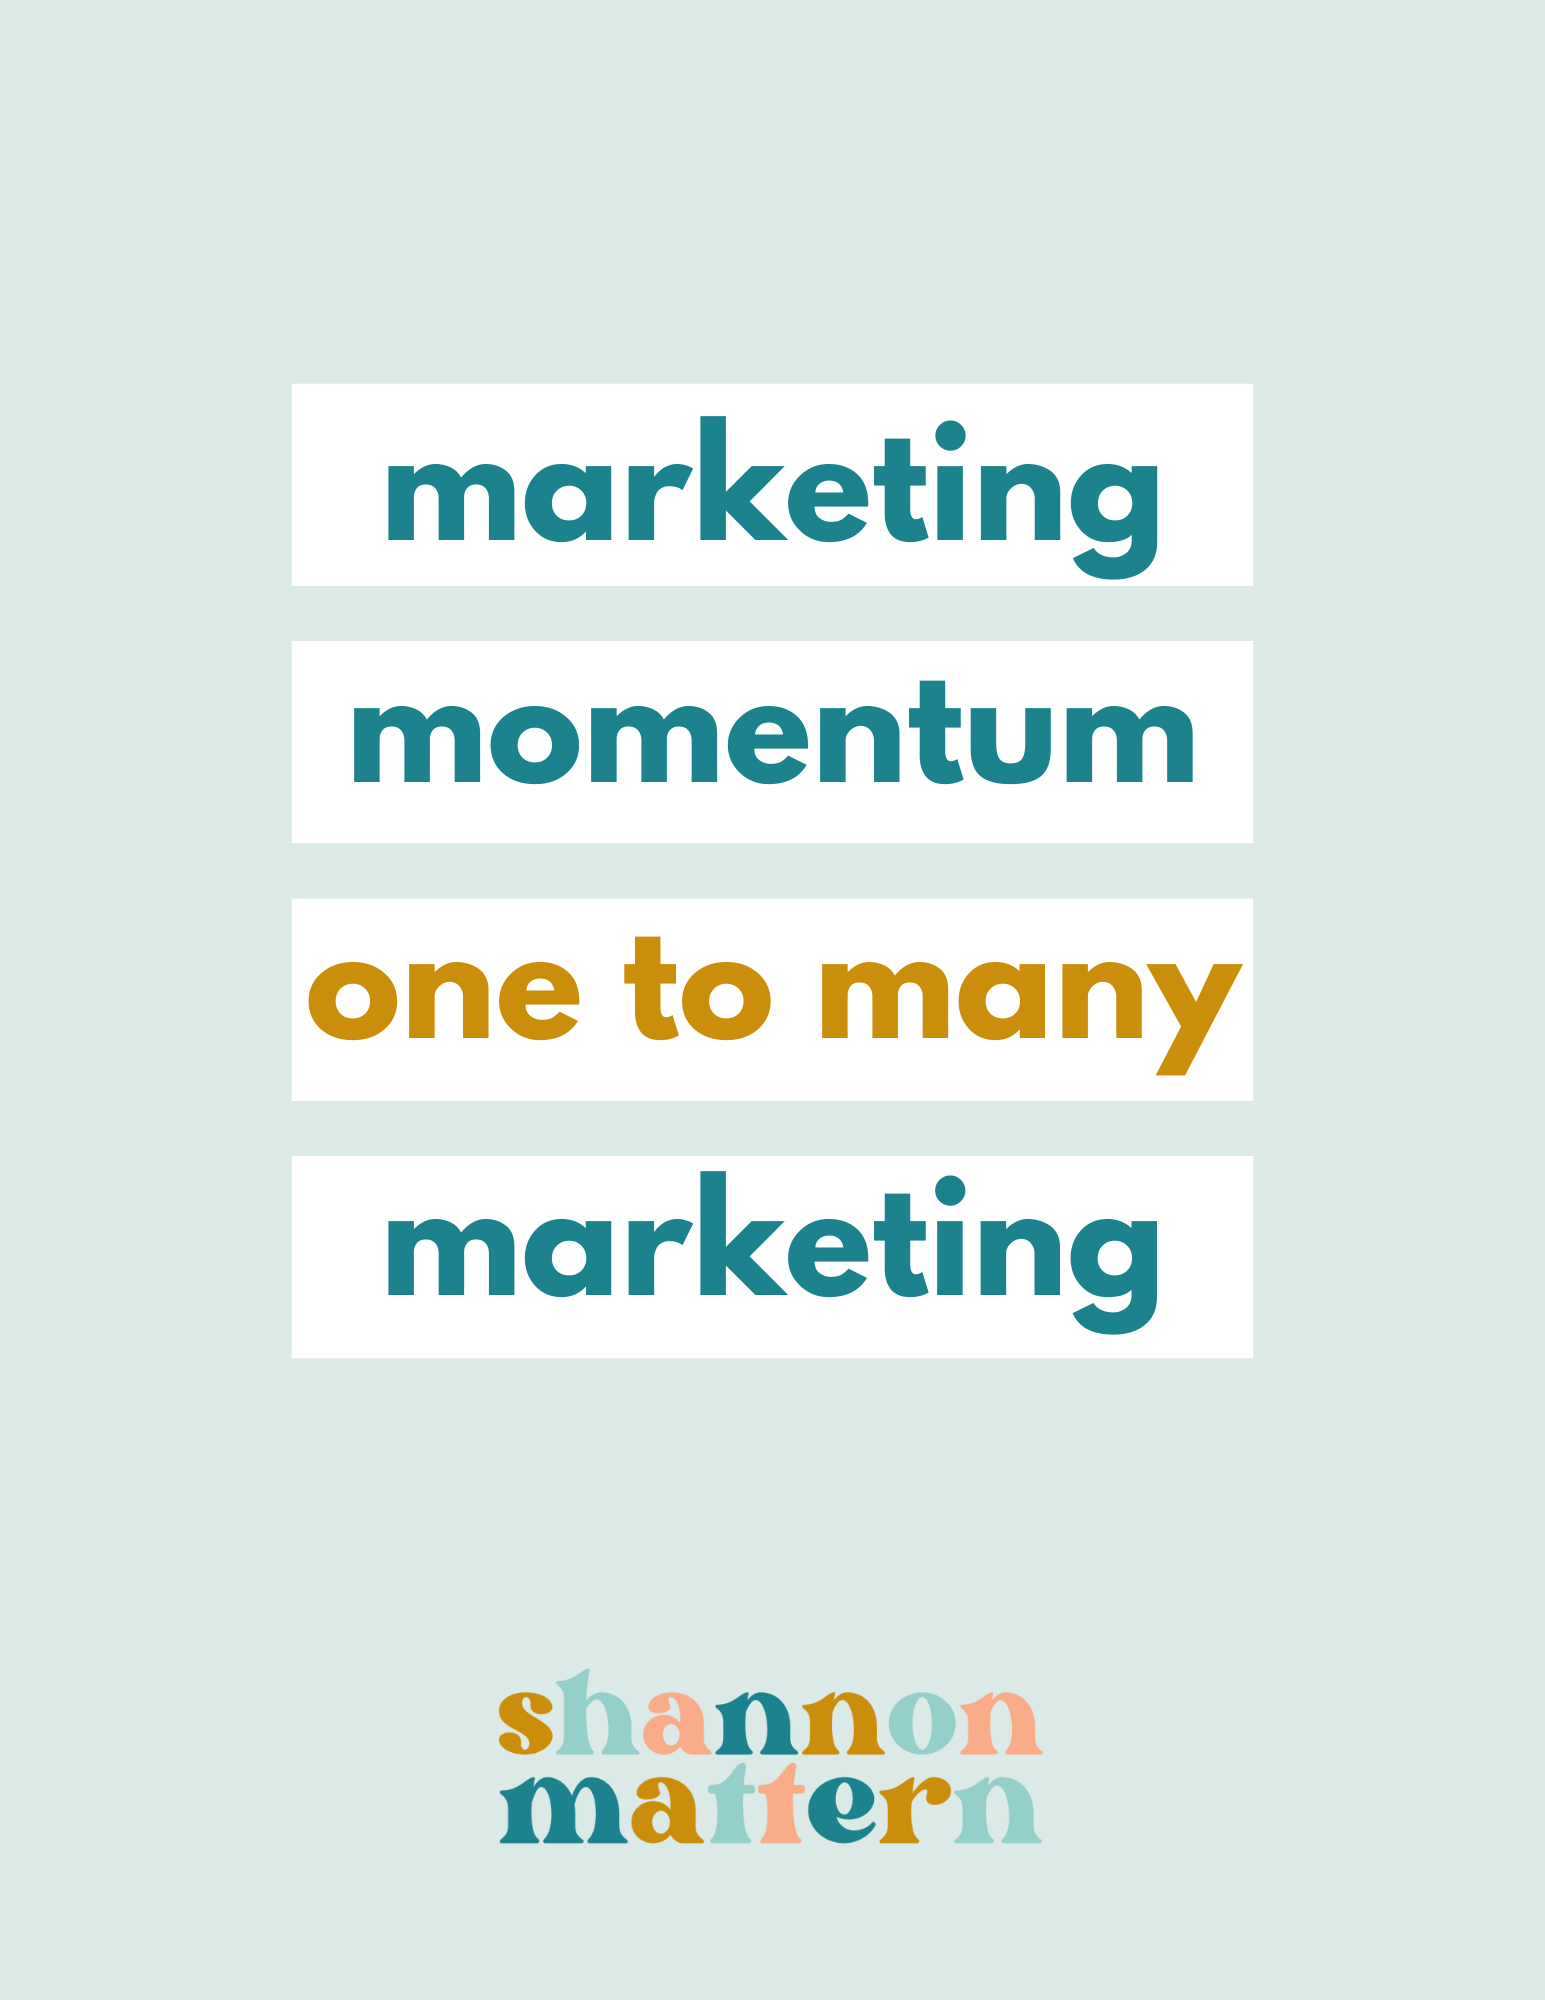 The image is depicting a marketing strategy of one-to-many marketing, as proposed by Shannon Mattern. Full Text: marketing momentum one to many marketing shannon mattern